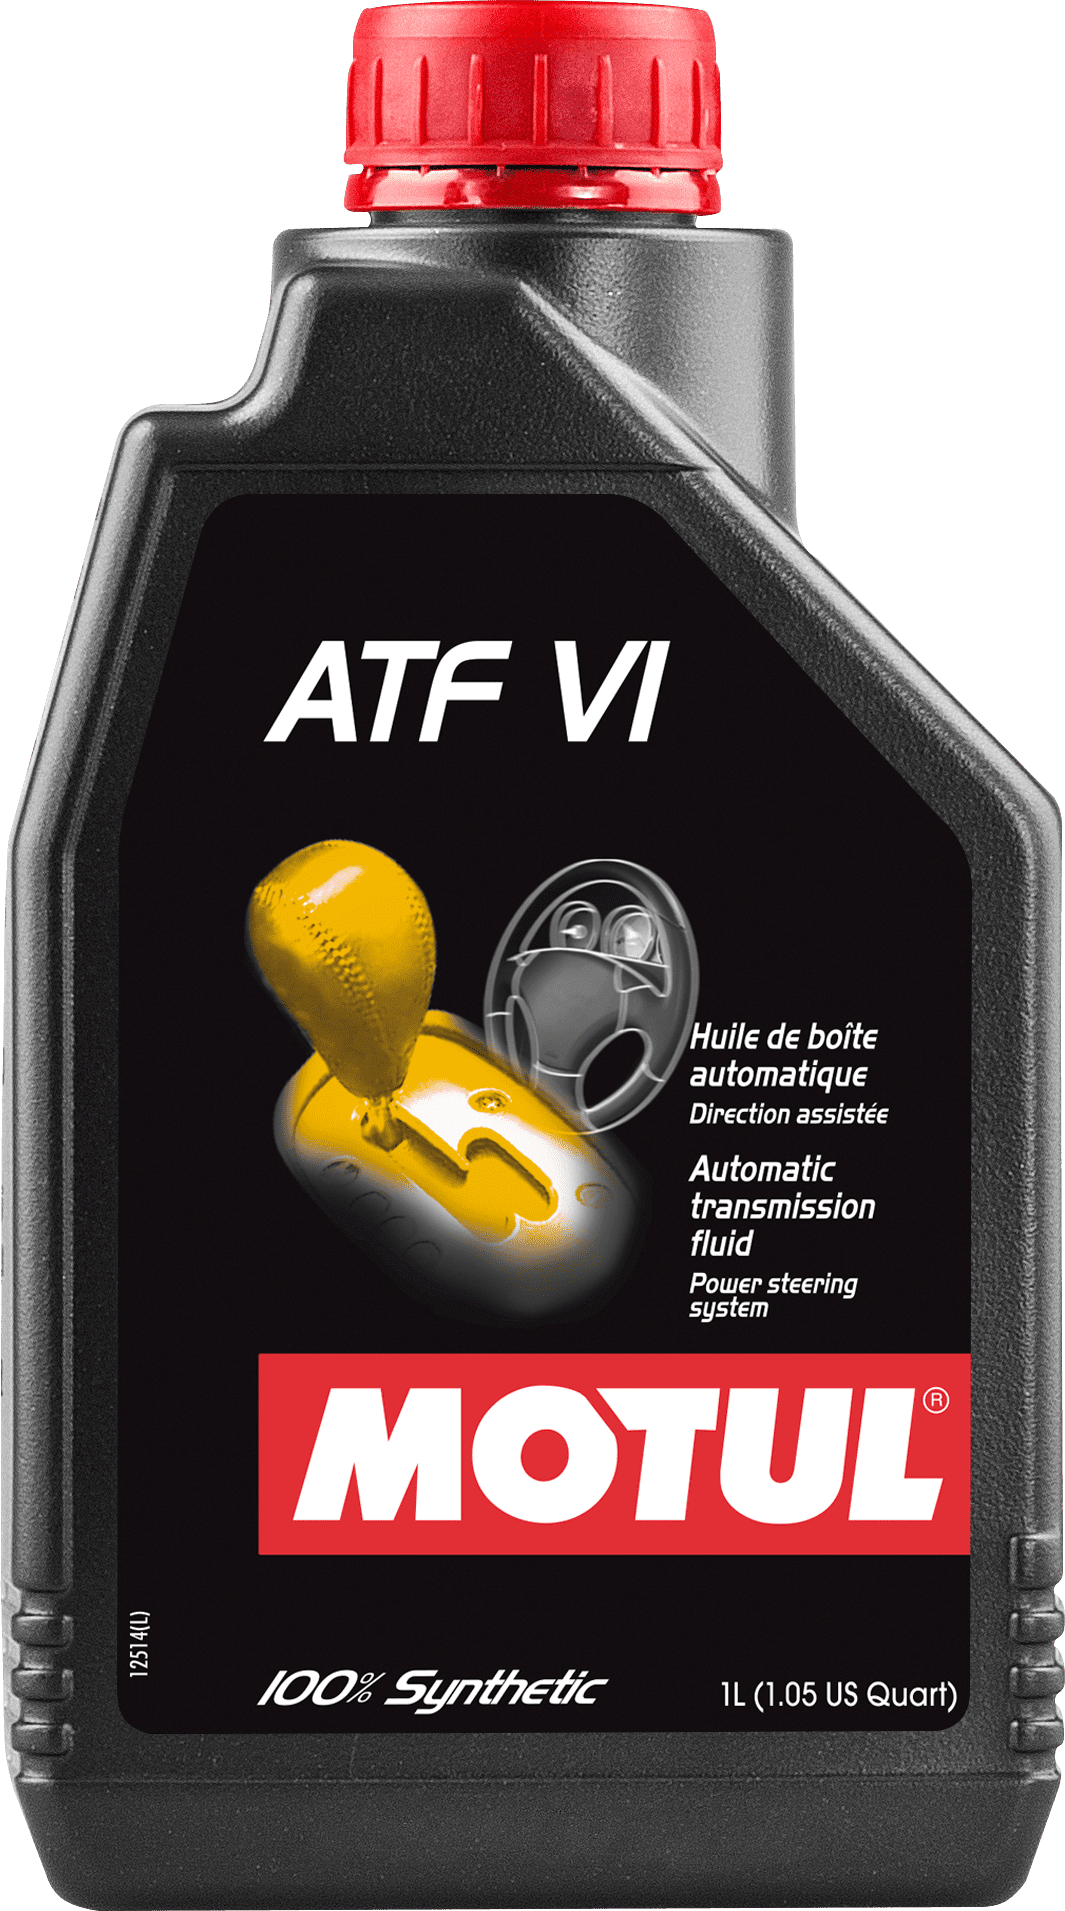 105774-1 100% Synthetic transmission fluid.